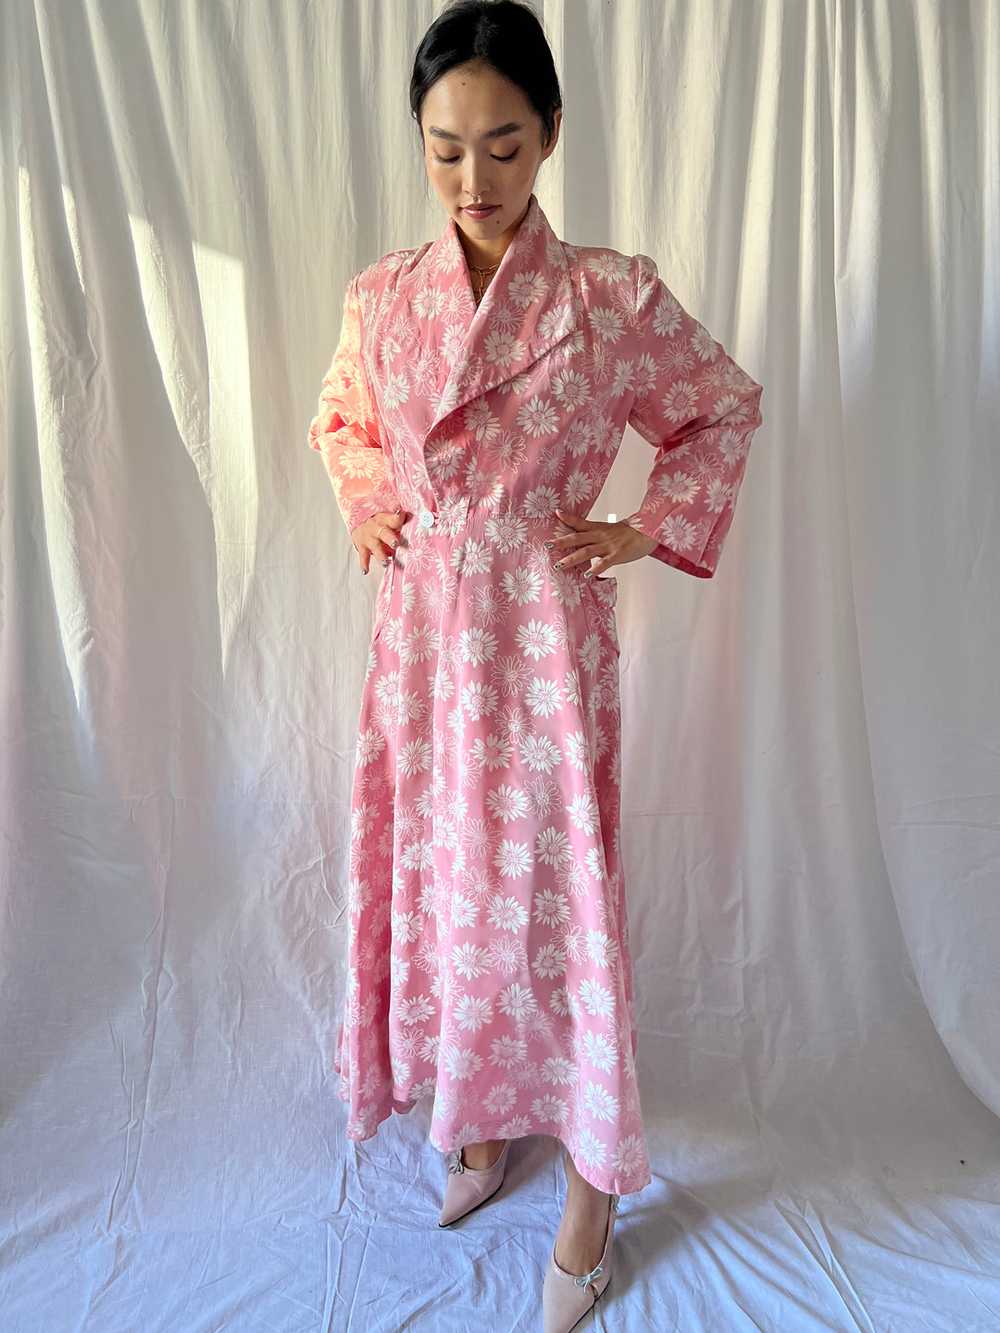 Vintage 1930s pink daisies gown robe - image 4